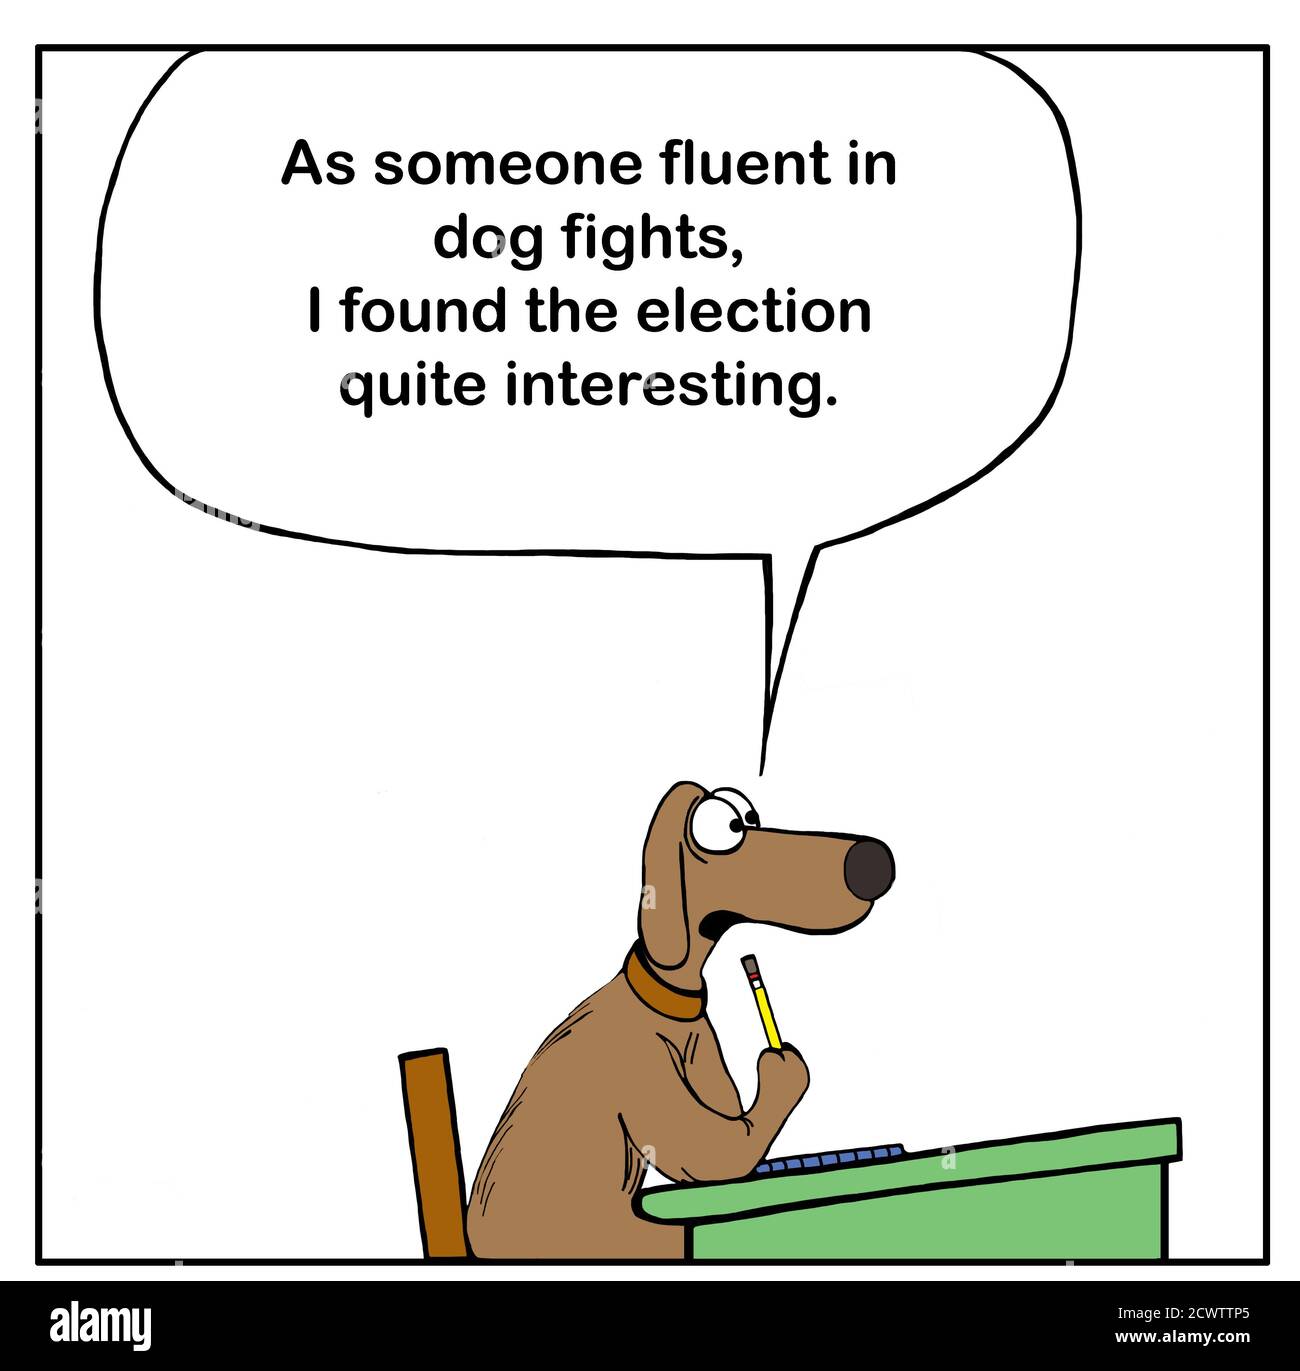 Color cartoon of a dog answering a question in classroom and stating as someone familiar with dog fights he found the election quite interesting. Stock Photo